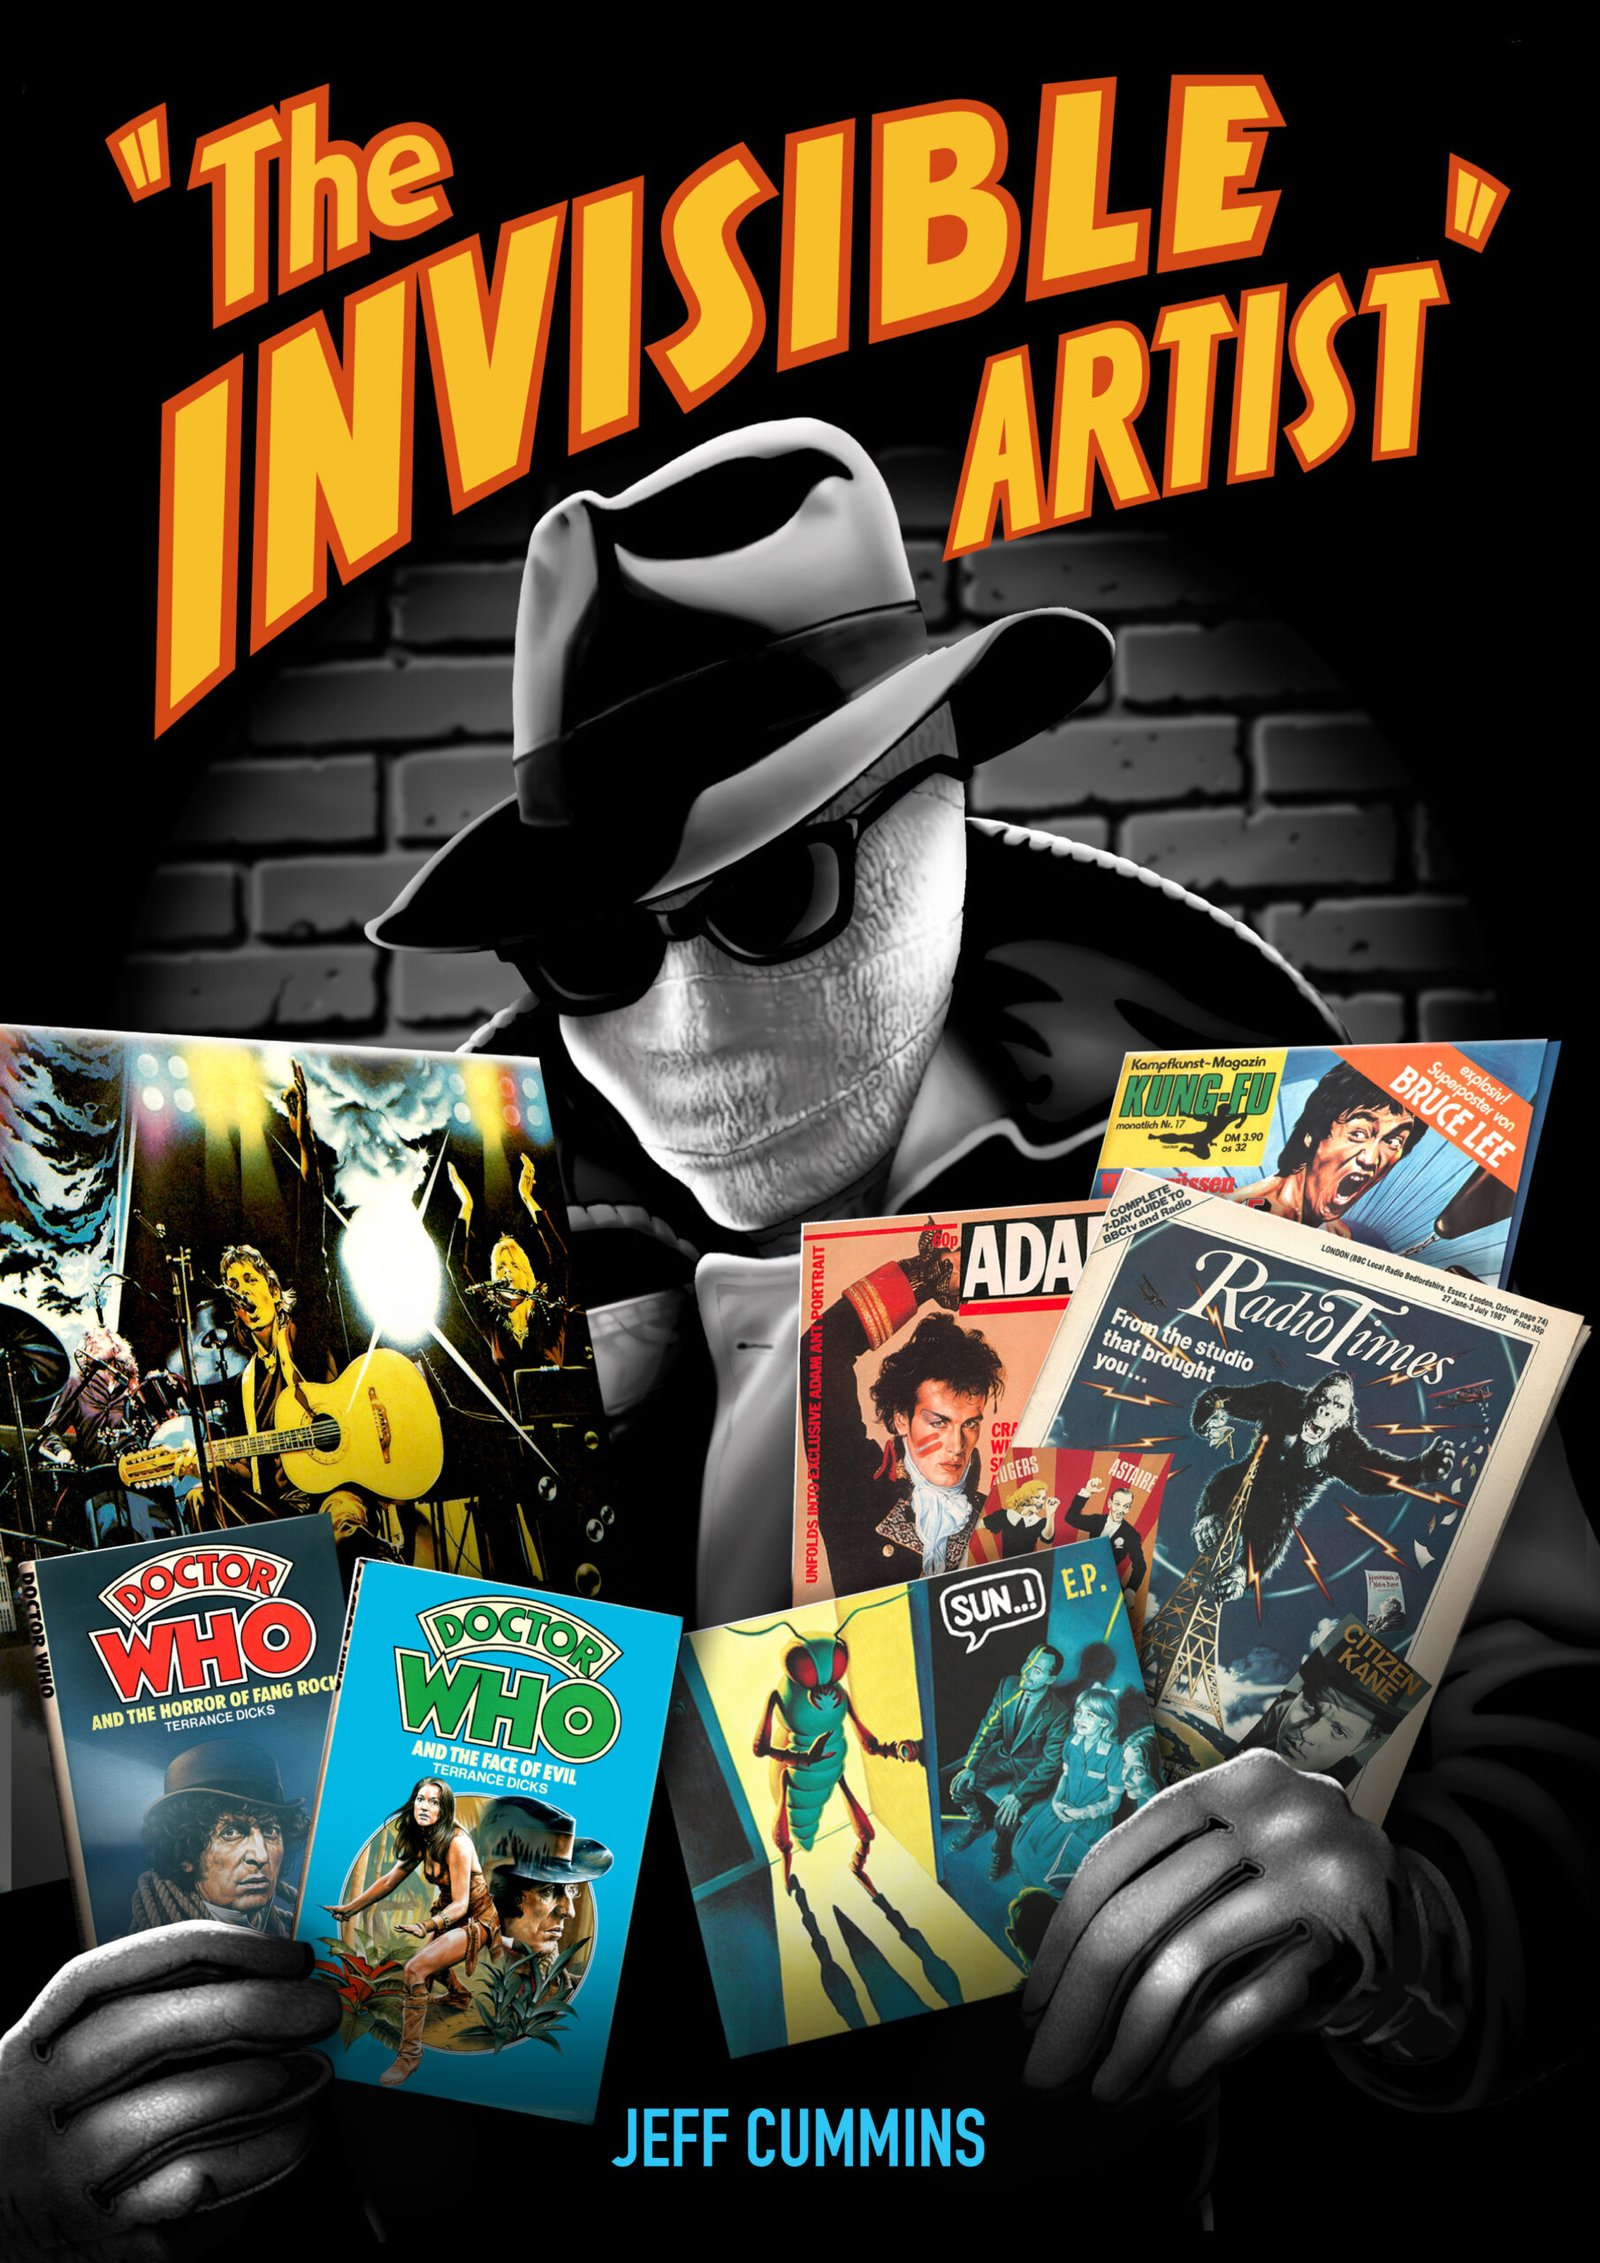 Candy Jar Books Announces The Invisible Artist, a Collection of Jeff Cummins’ Work